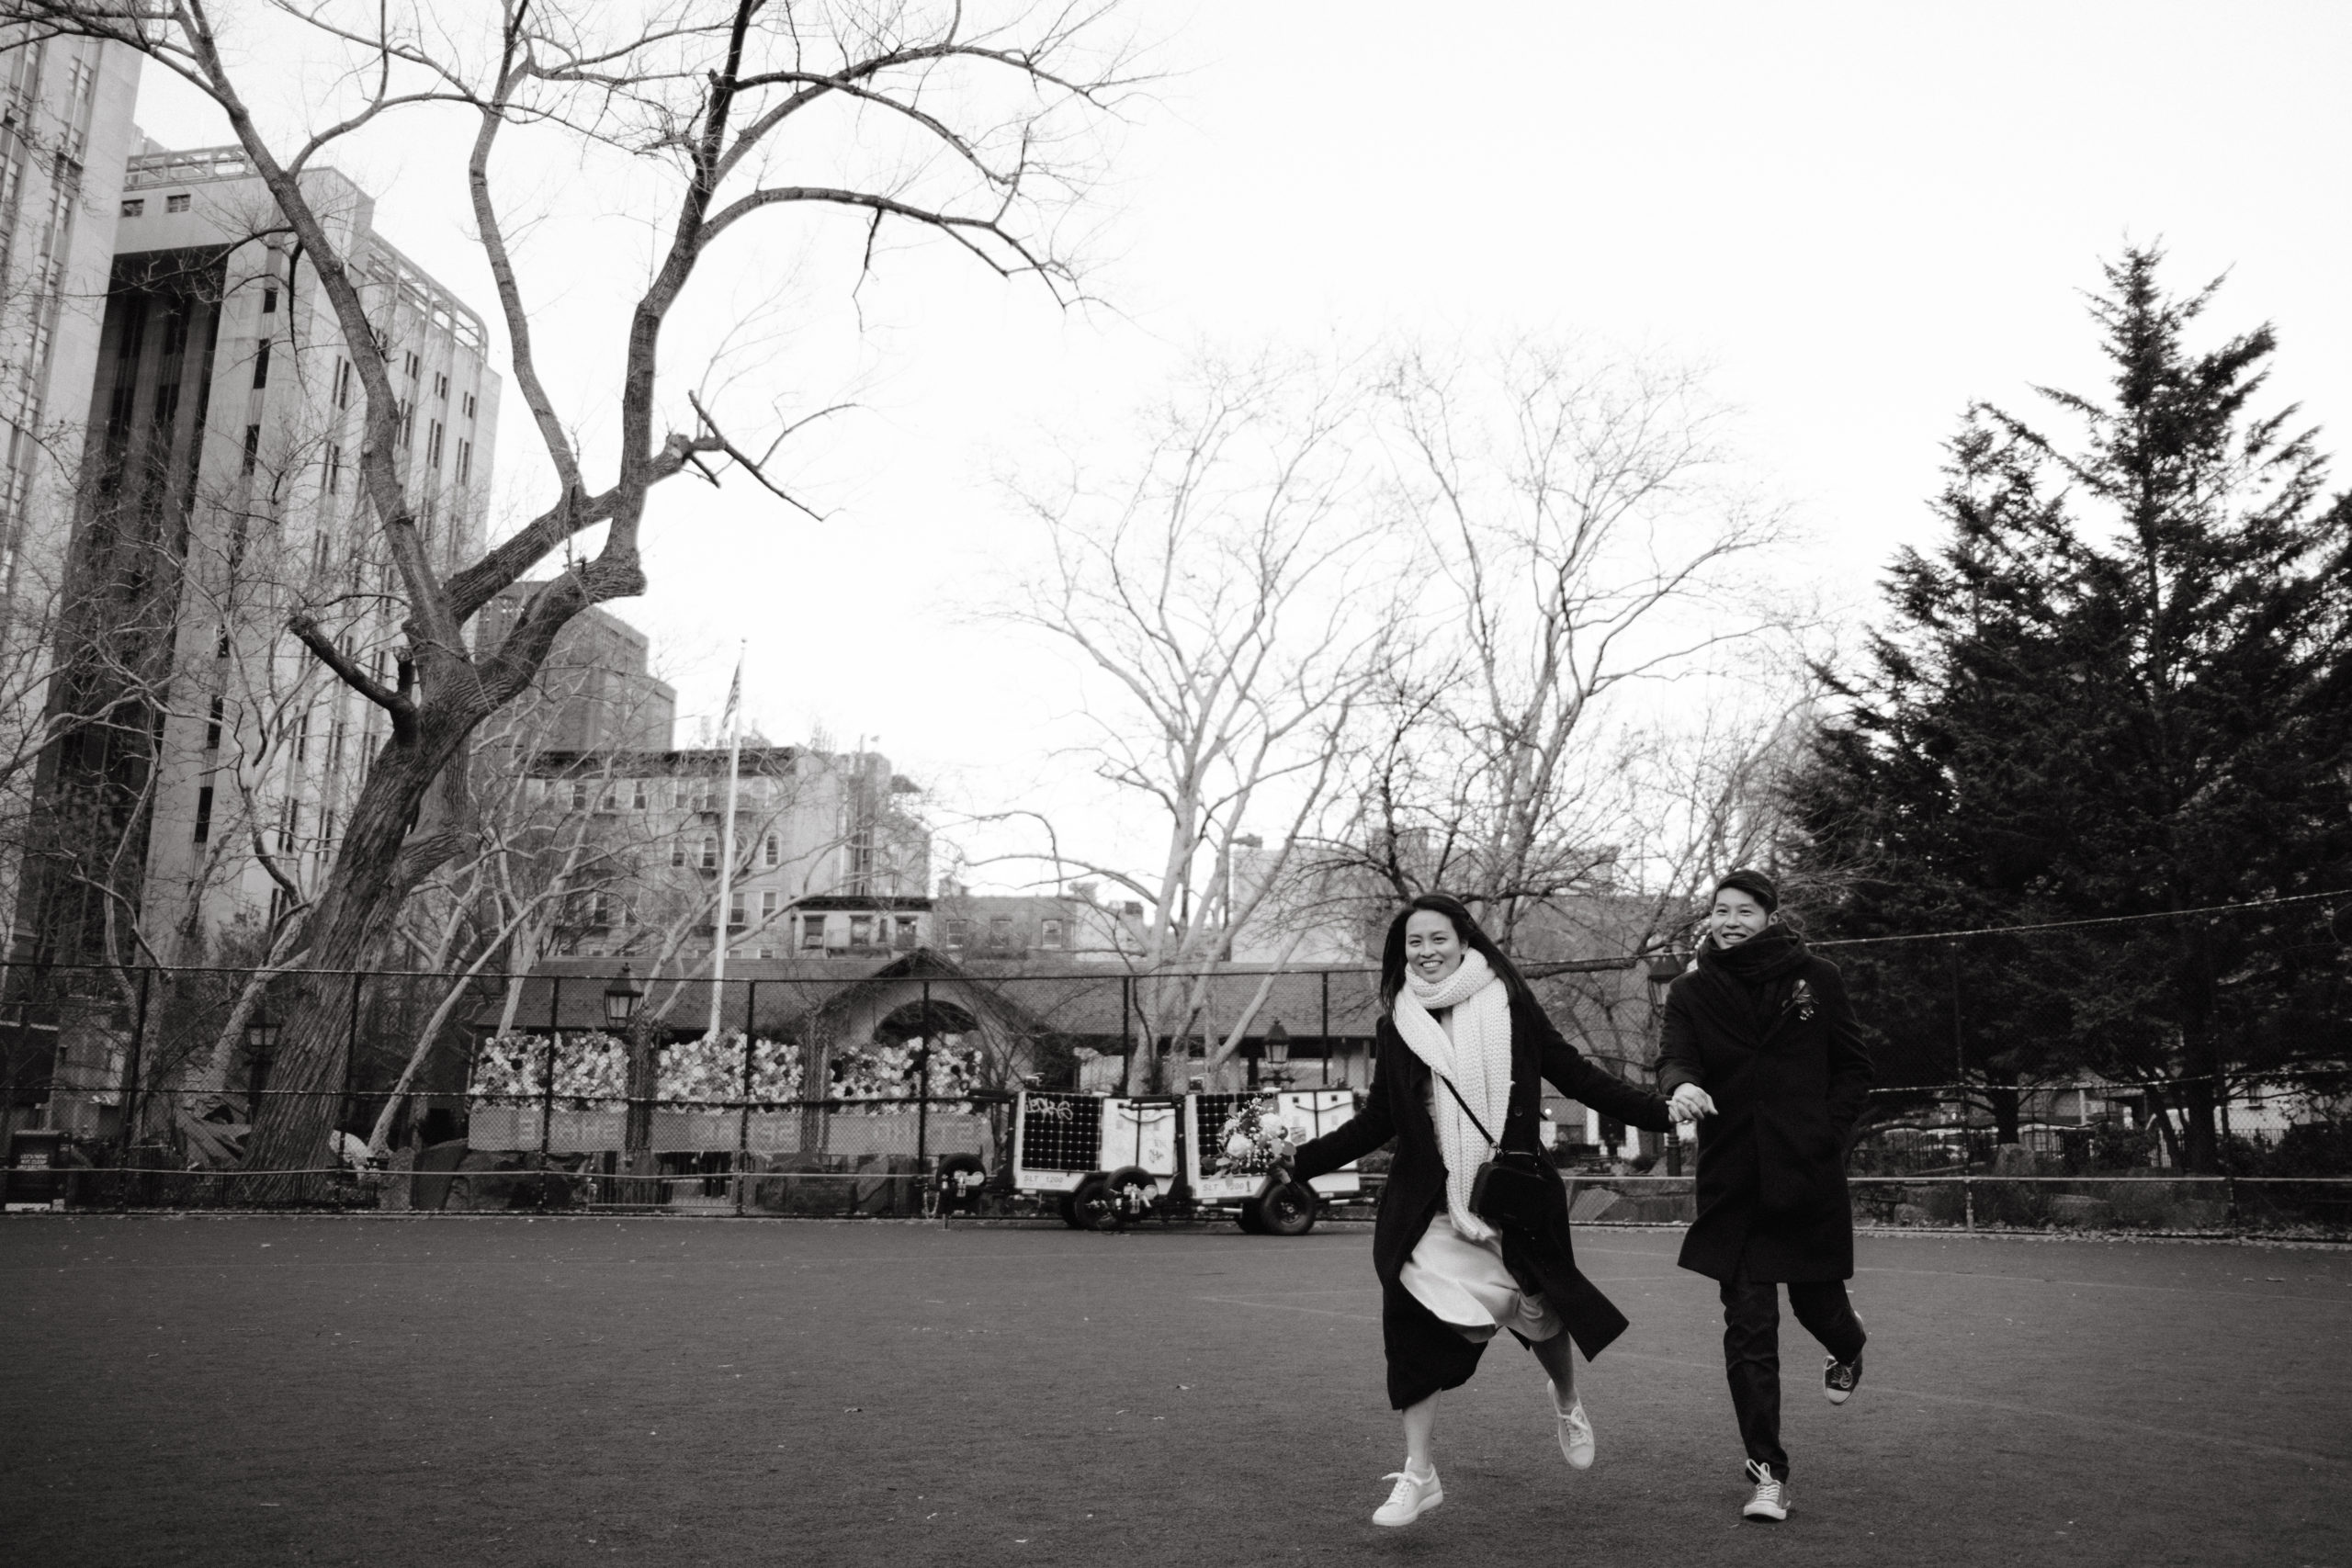 Editorial photo of the newly-weds running in a park. NYC Christmas elopement image by Jenny Fu Studio